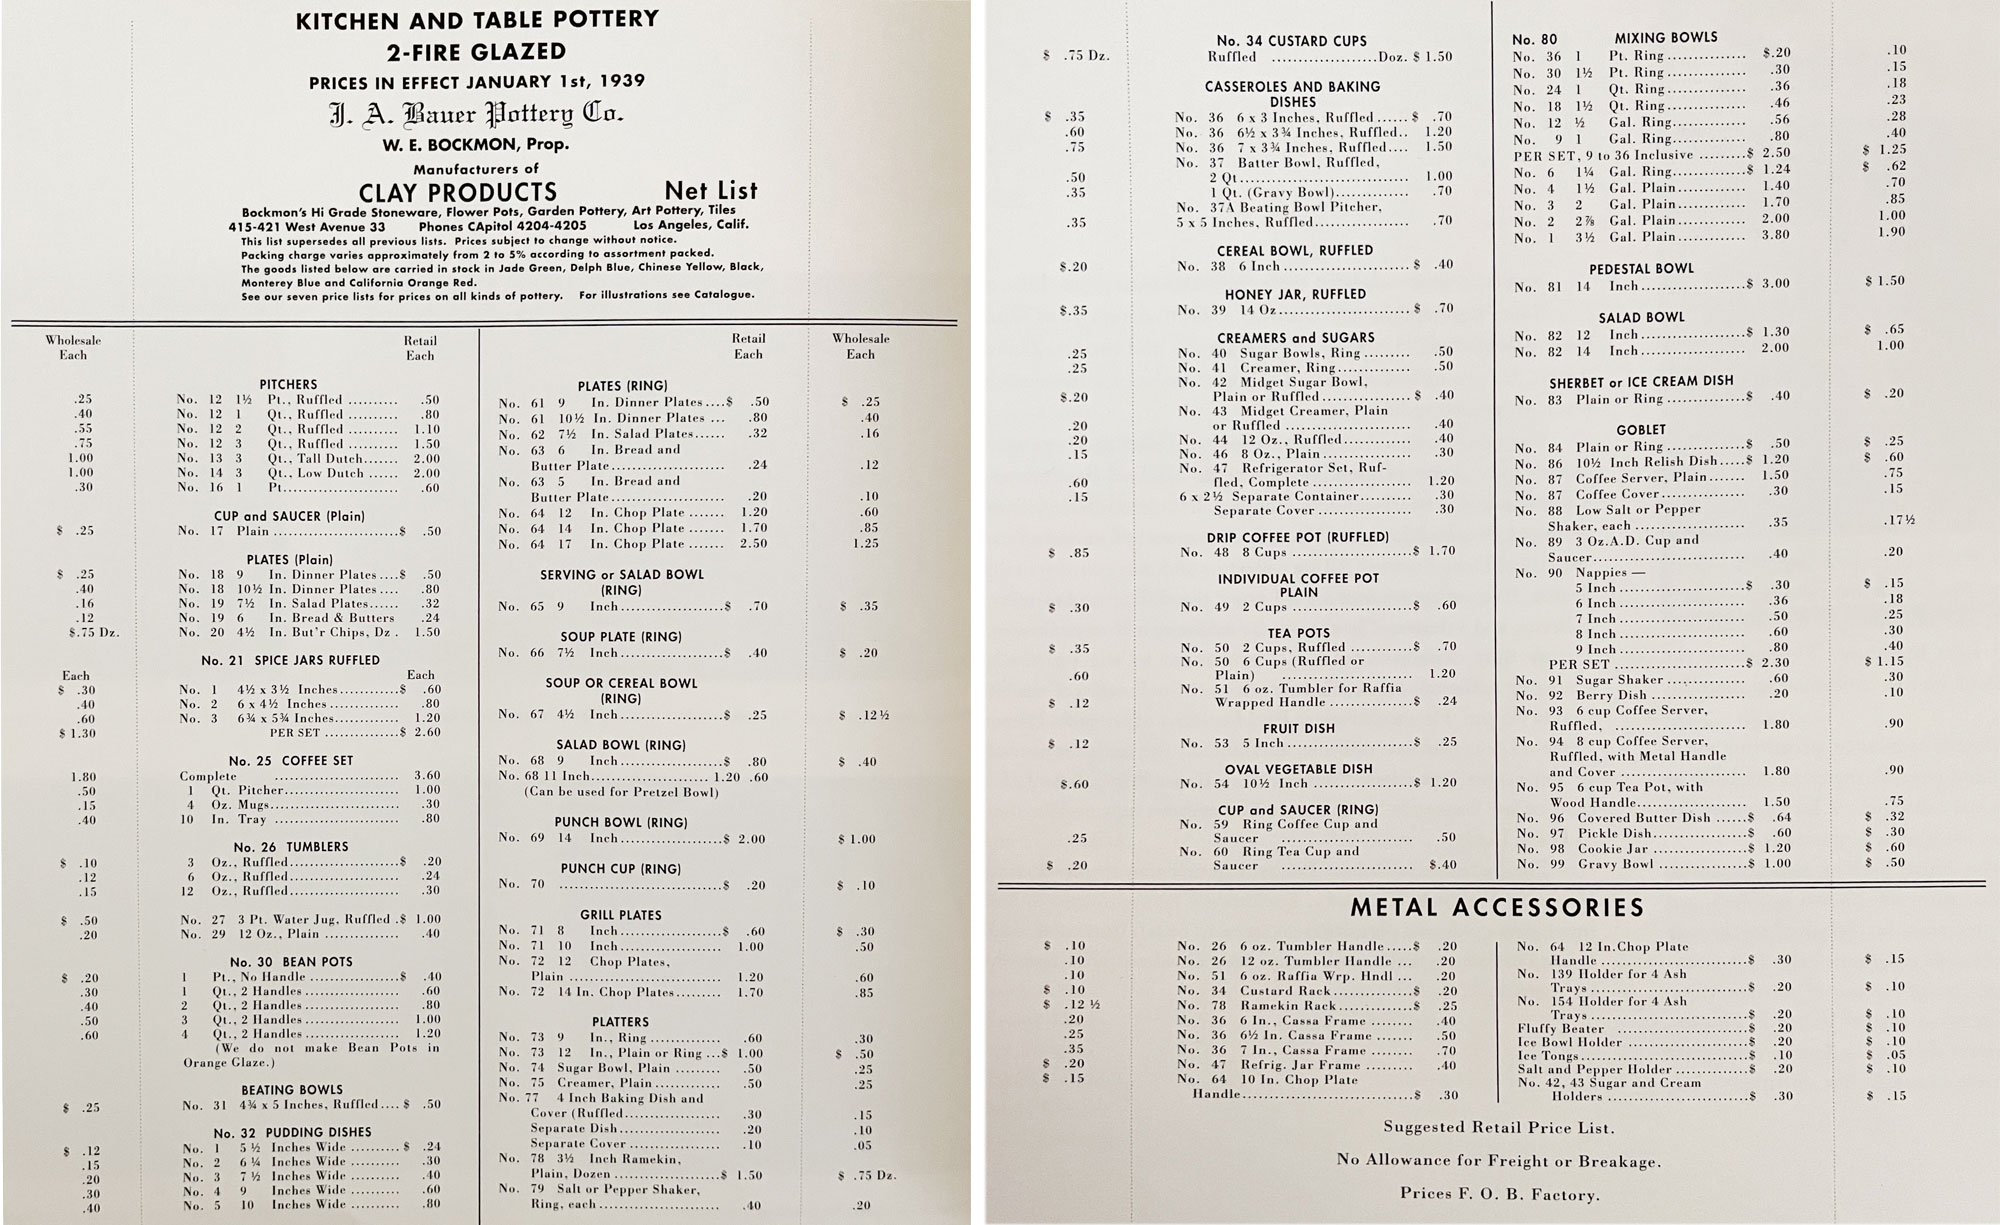 Bauer Pottery Price List 1939